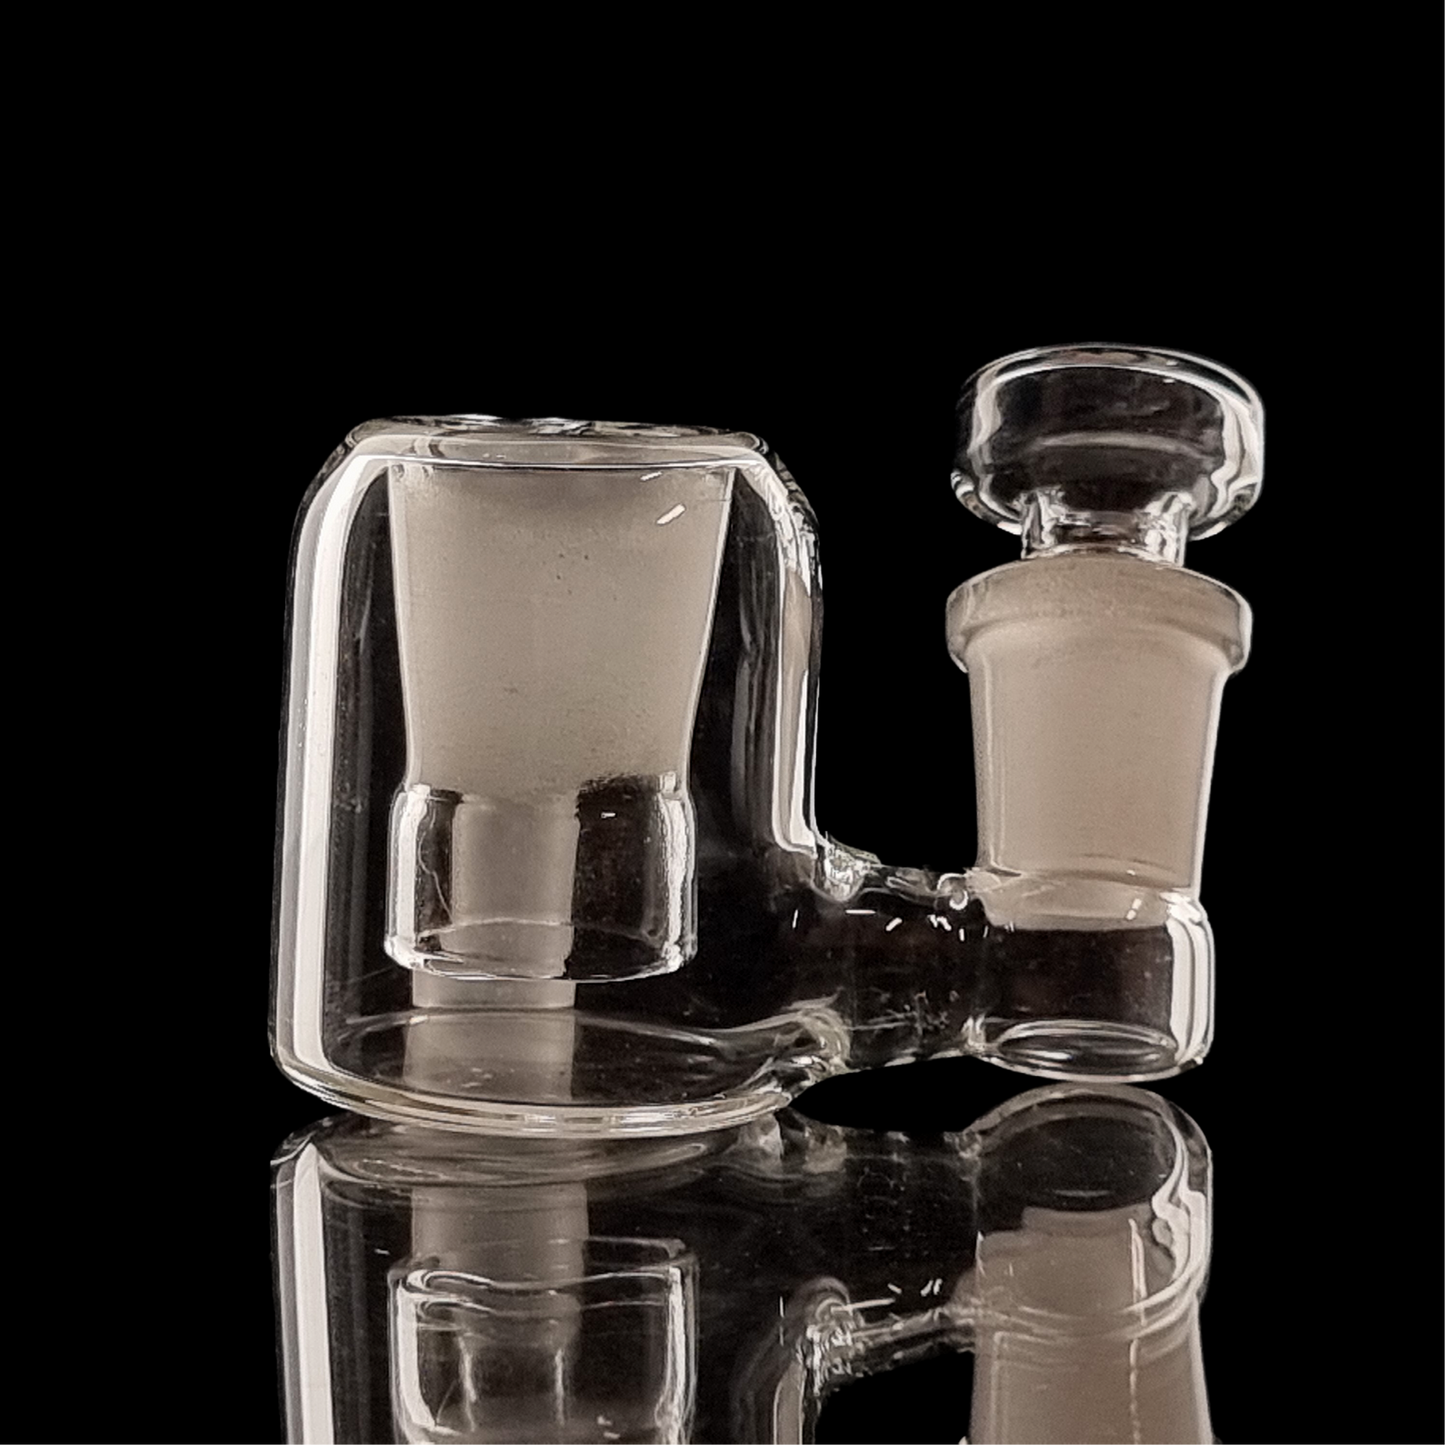 Mini Carbed Dry Catcher/Chamber by QaromaShop